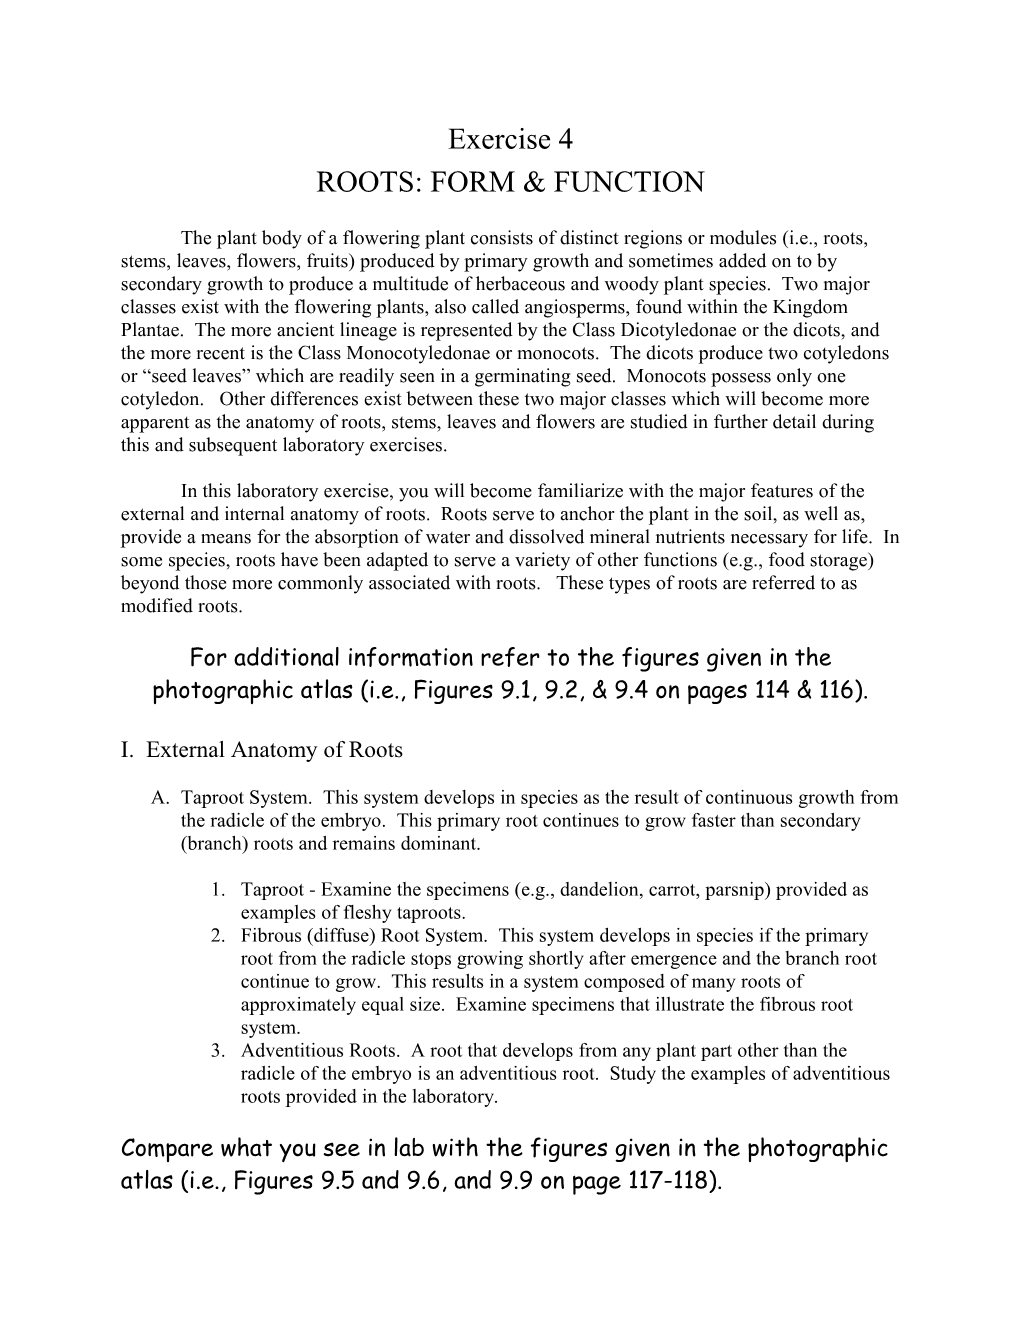 Roots: Form & Function